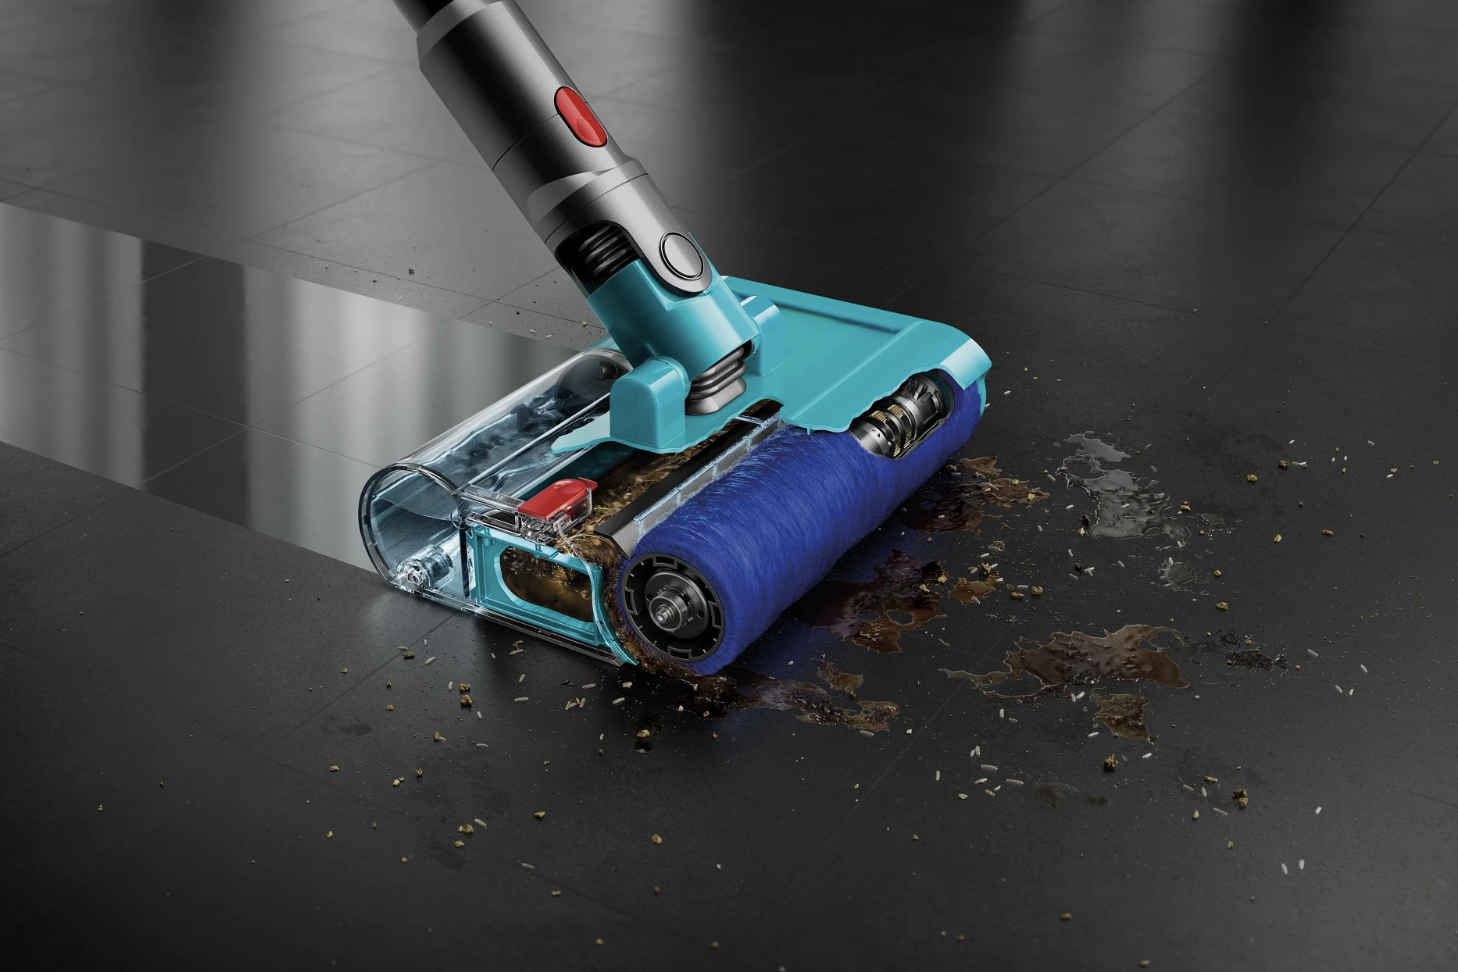 Dyson Submarine wet vac cleaning up a spill